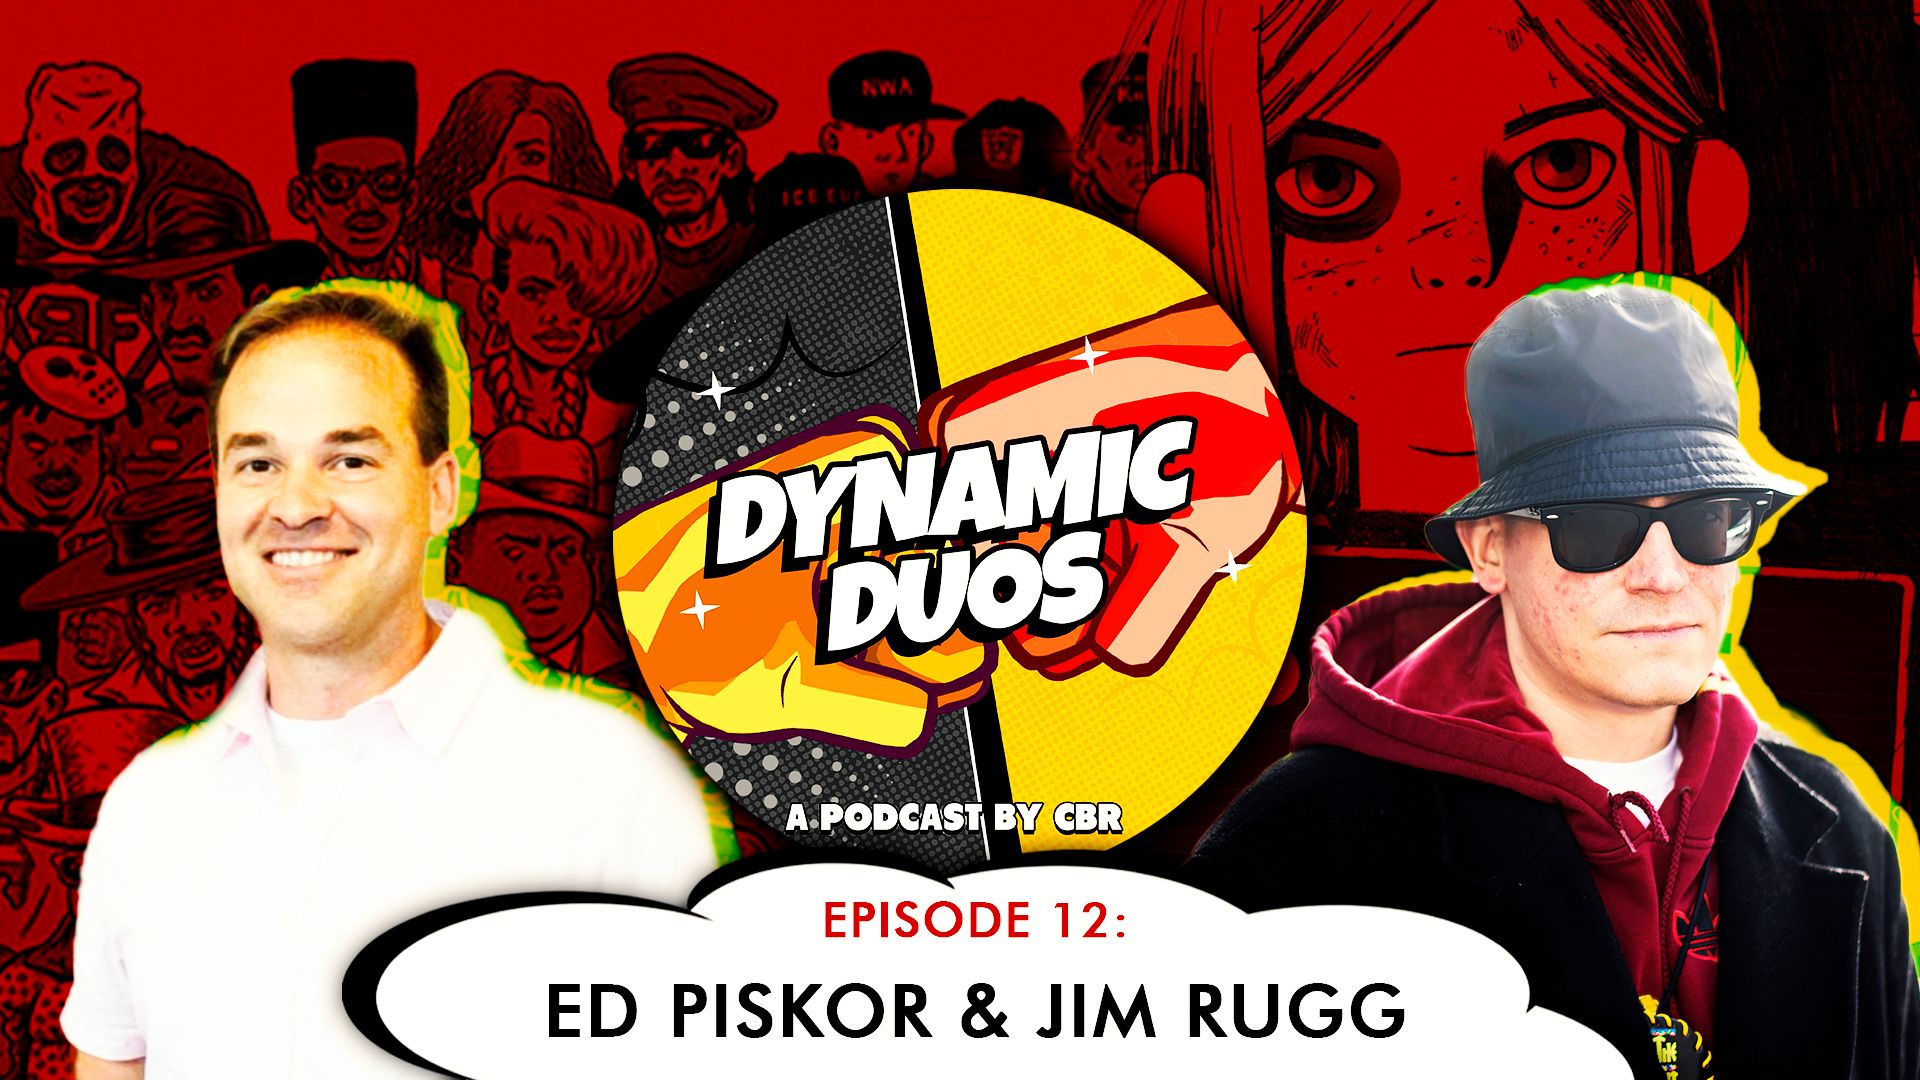 Ed Piskor and Jim Rugg Interview Each Other on Cartoonist Kayfabe